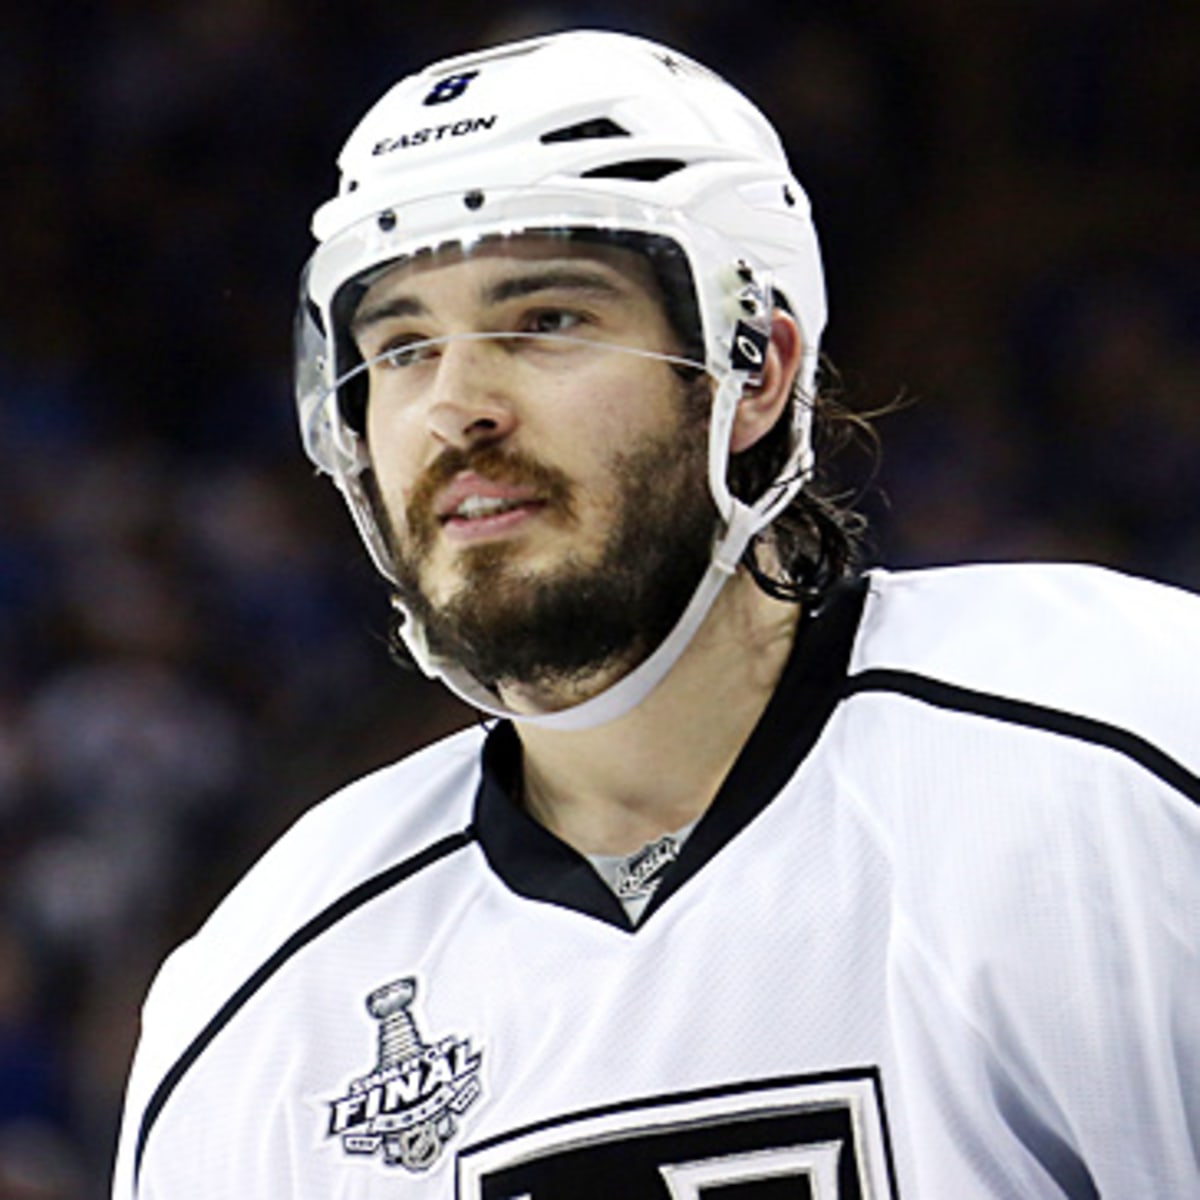 The Drew Doughty Story 